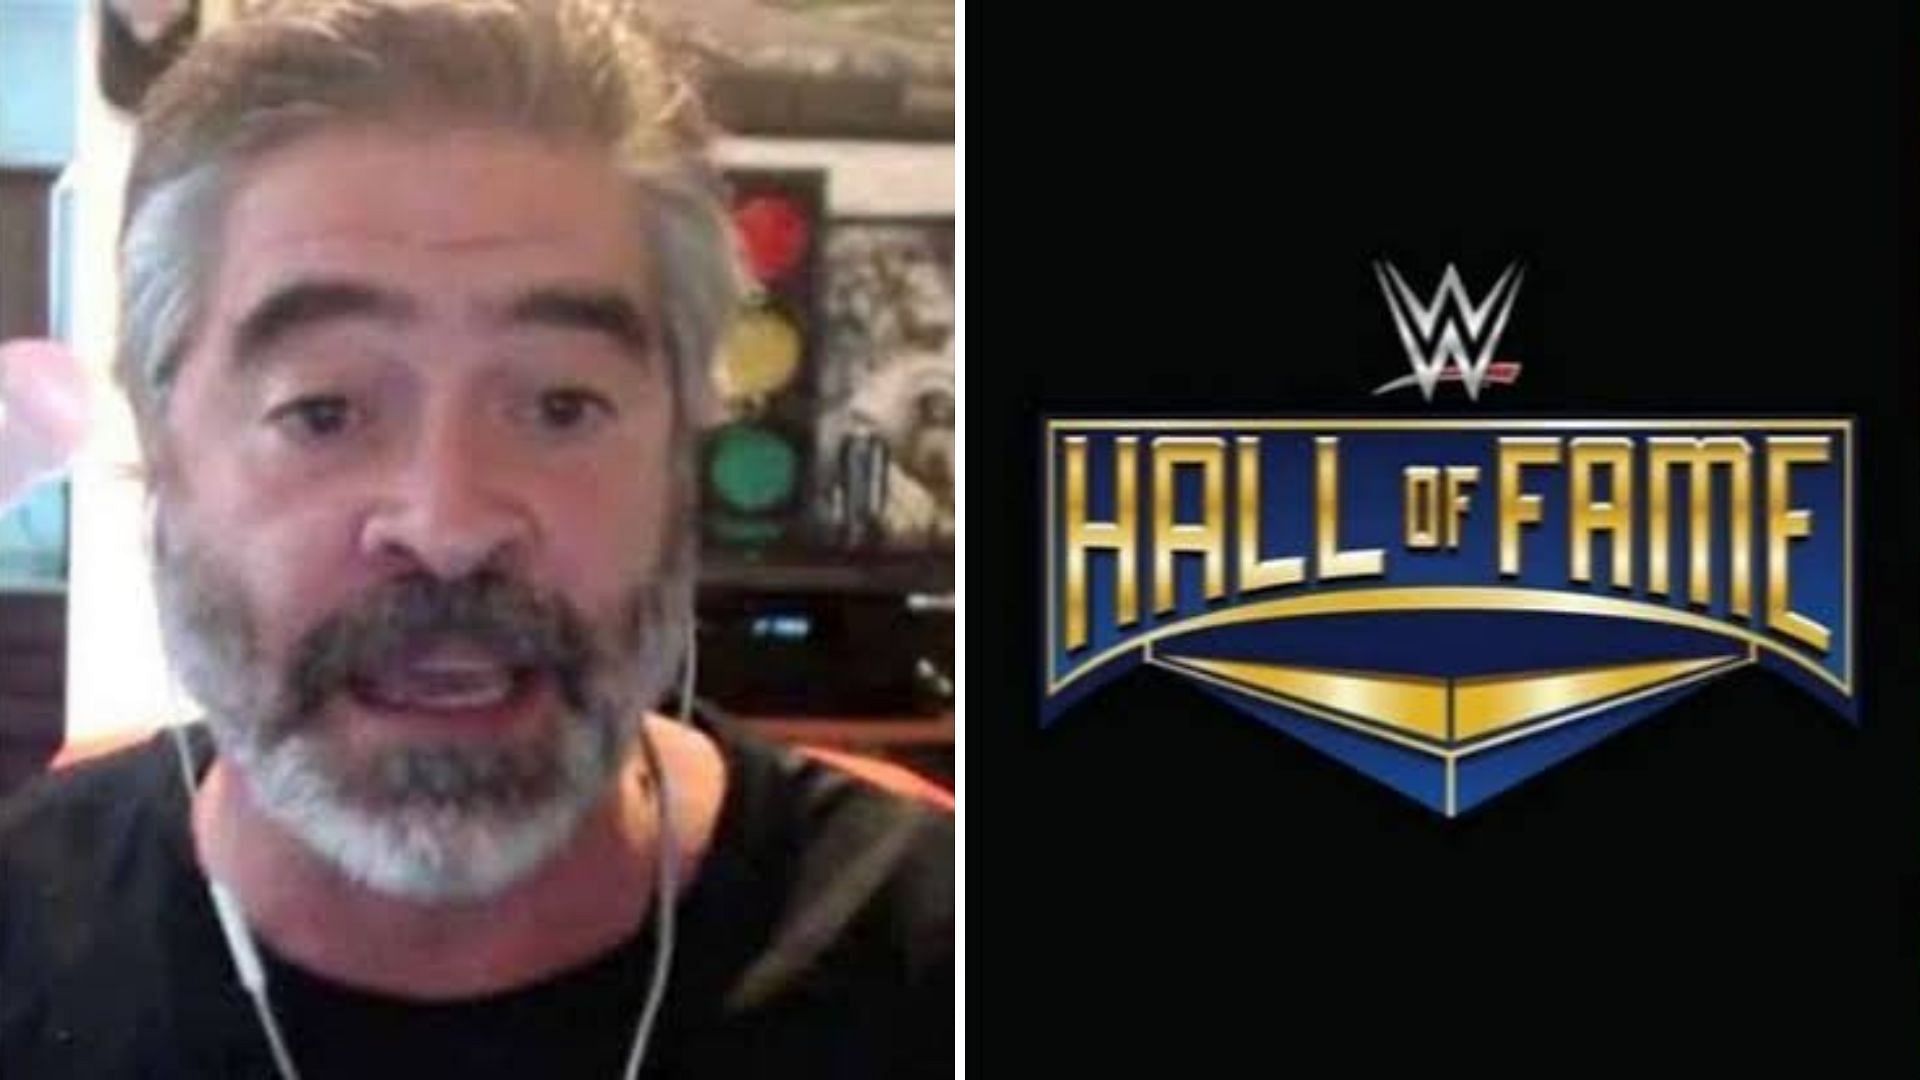 Vince Russo wants Steve Lombardi in WWE Hall of Fame.